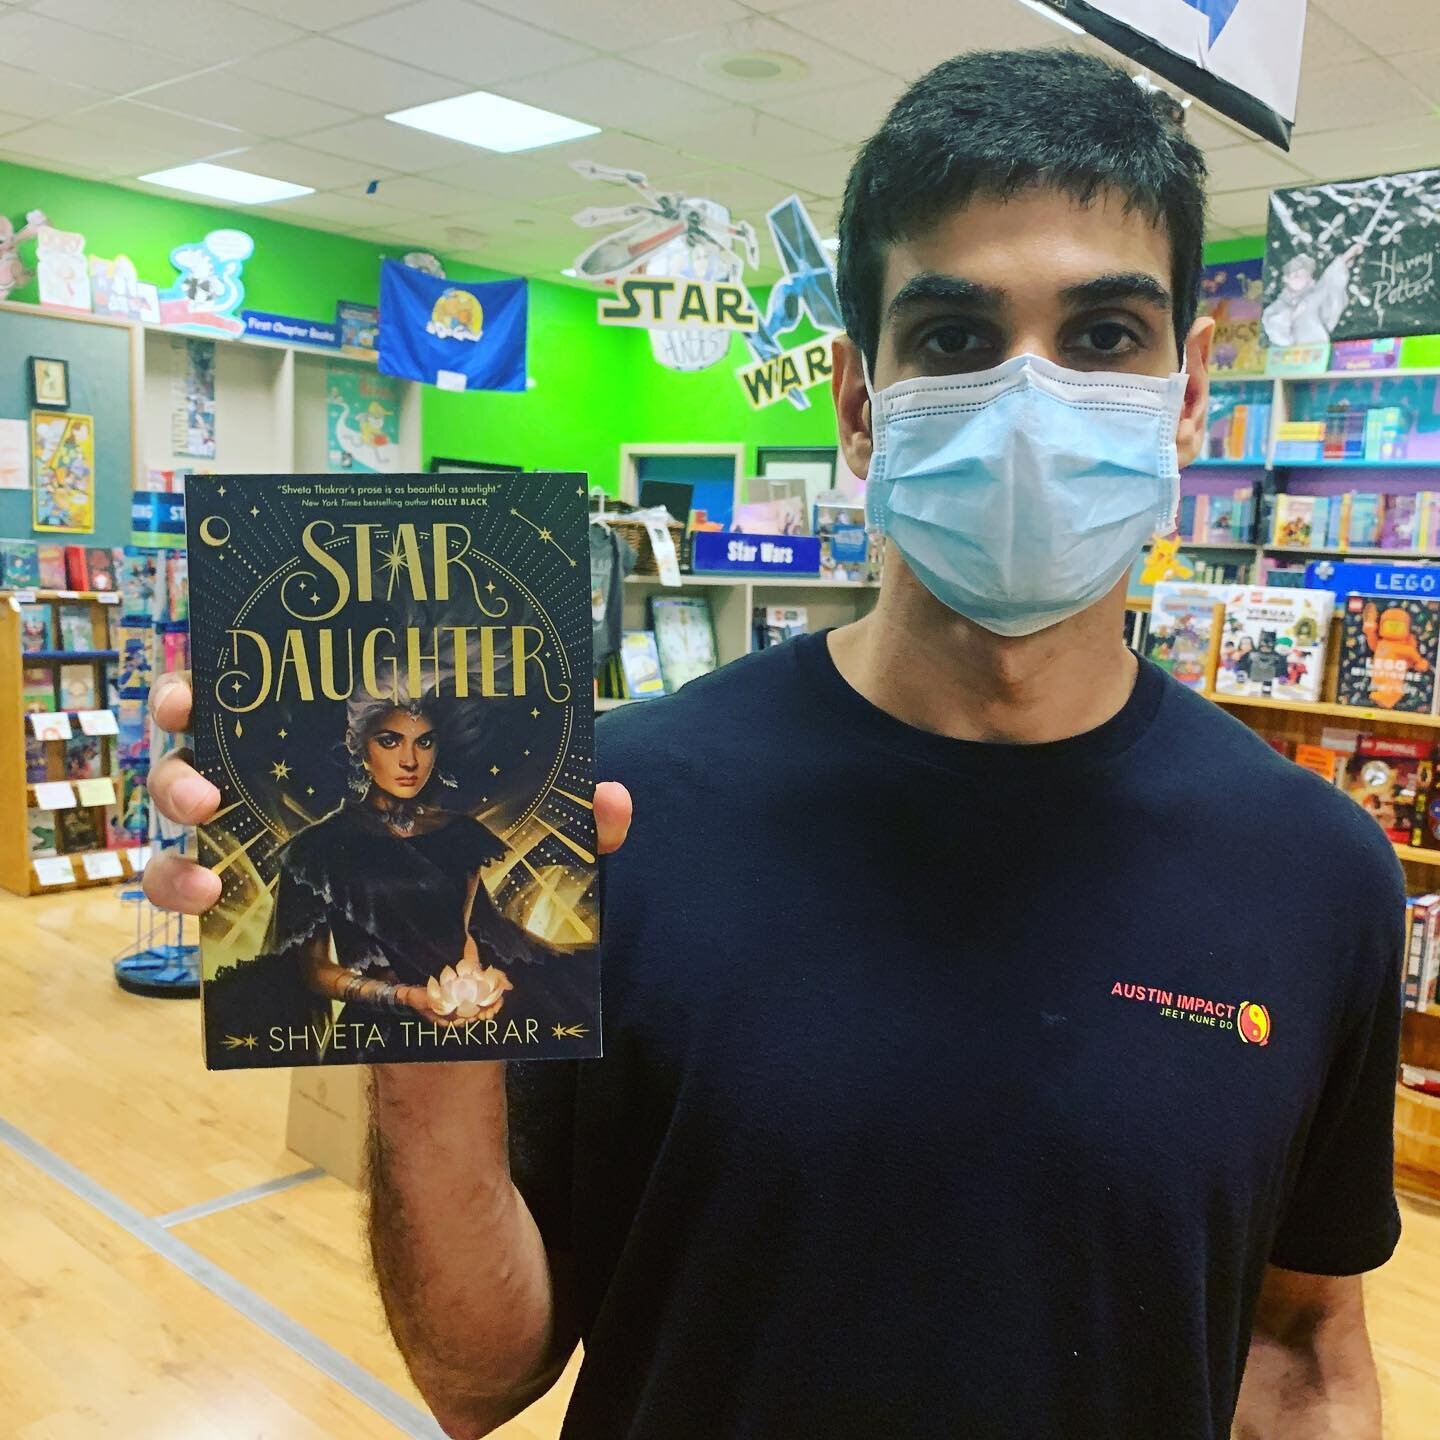 Look what&rsquo;s out today! My handsome baby brother is modeling the paperback of STAR DAUGHTER&mdash;which contains the first two chapters of THE DREAM RUNNERS. 🐍🦅💎📕 If you want a sneak peek, go grab your copy! ✨✨✨✨✨

The lovely shelf talker is